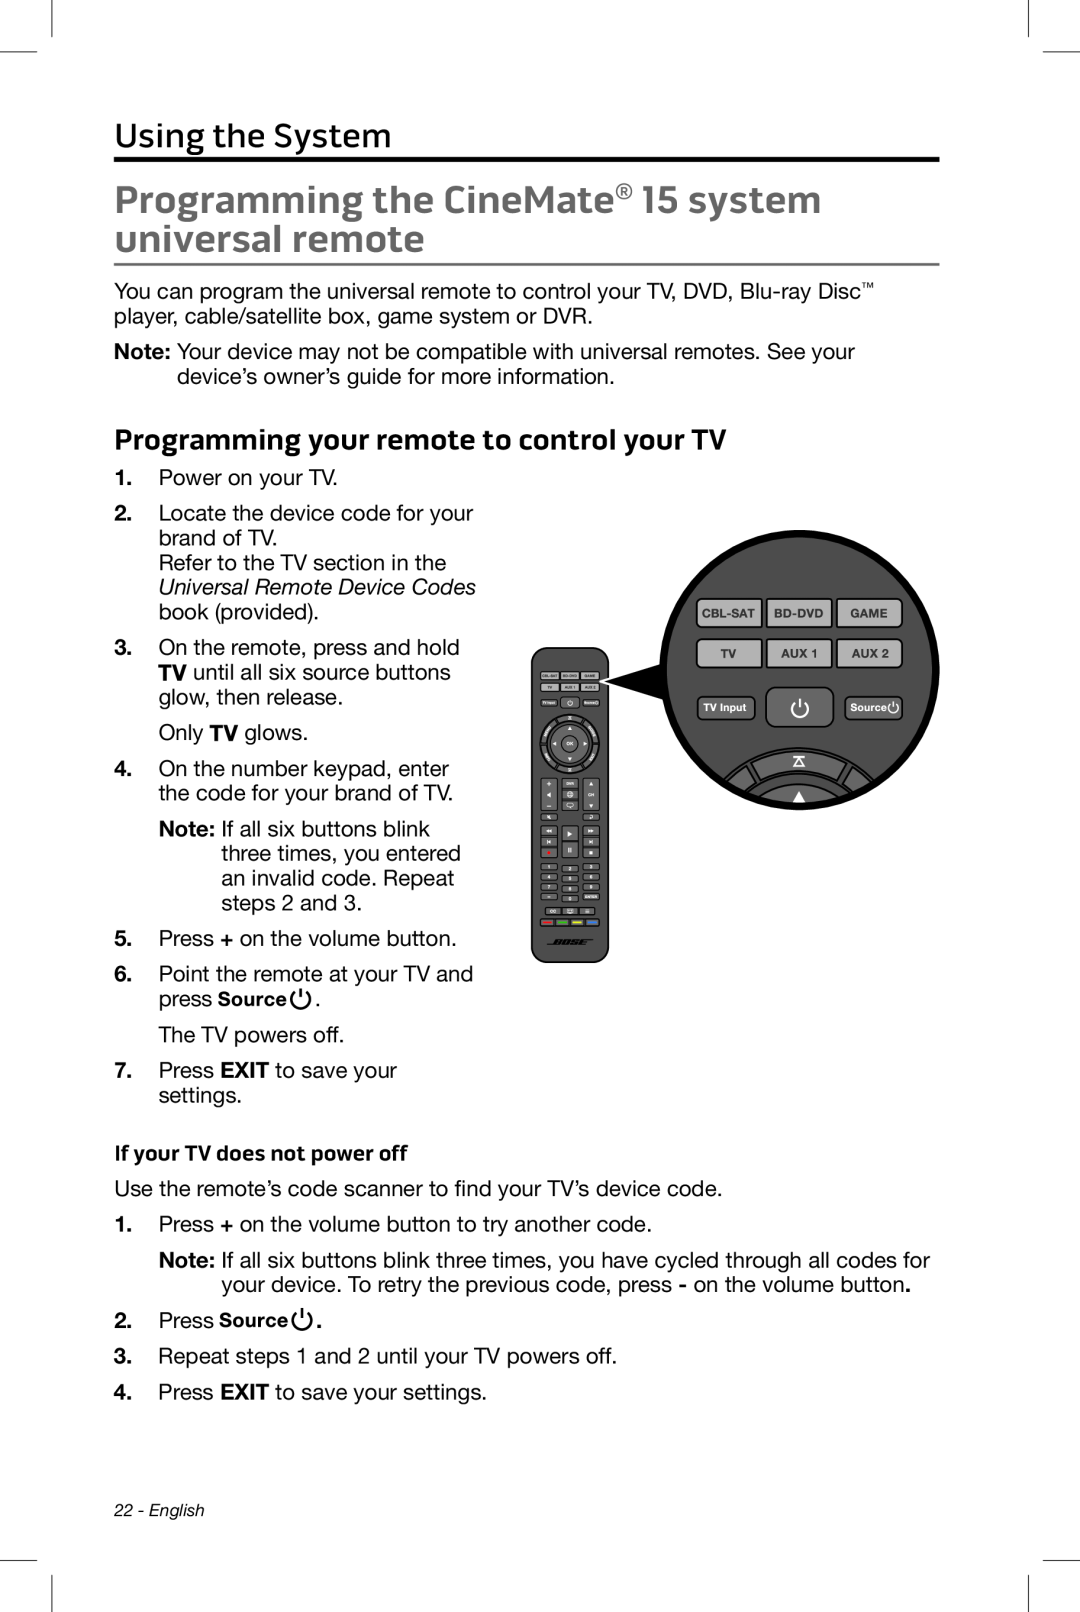 Bose CineMate 15/10 manual Using the System, Programming your remote to control your TV, If your TV does not power off 